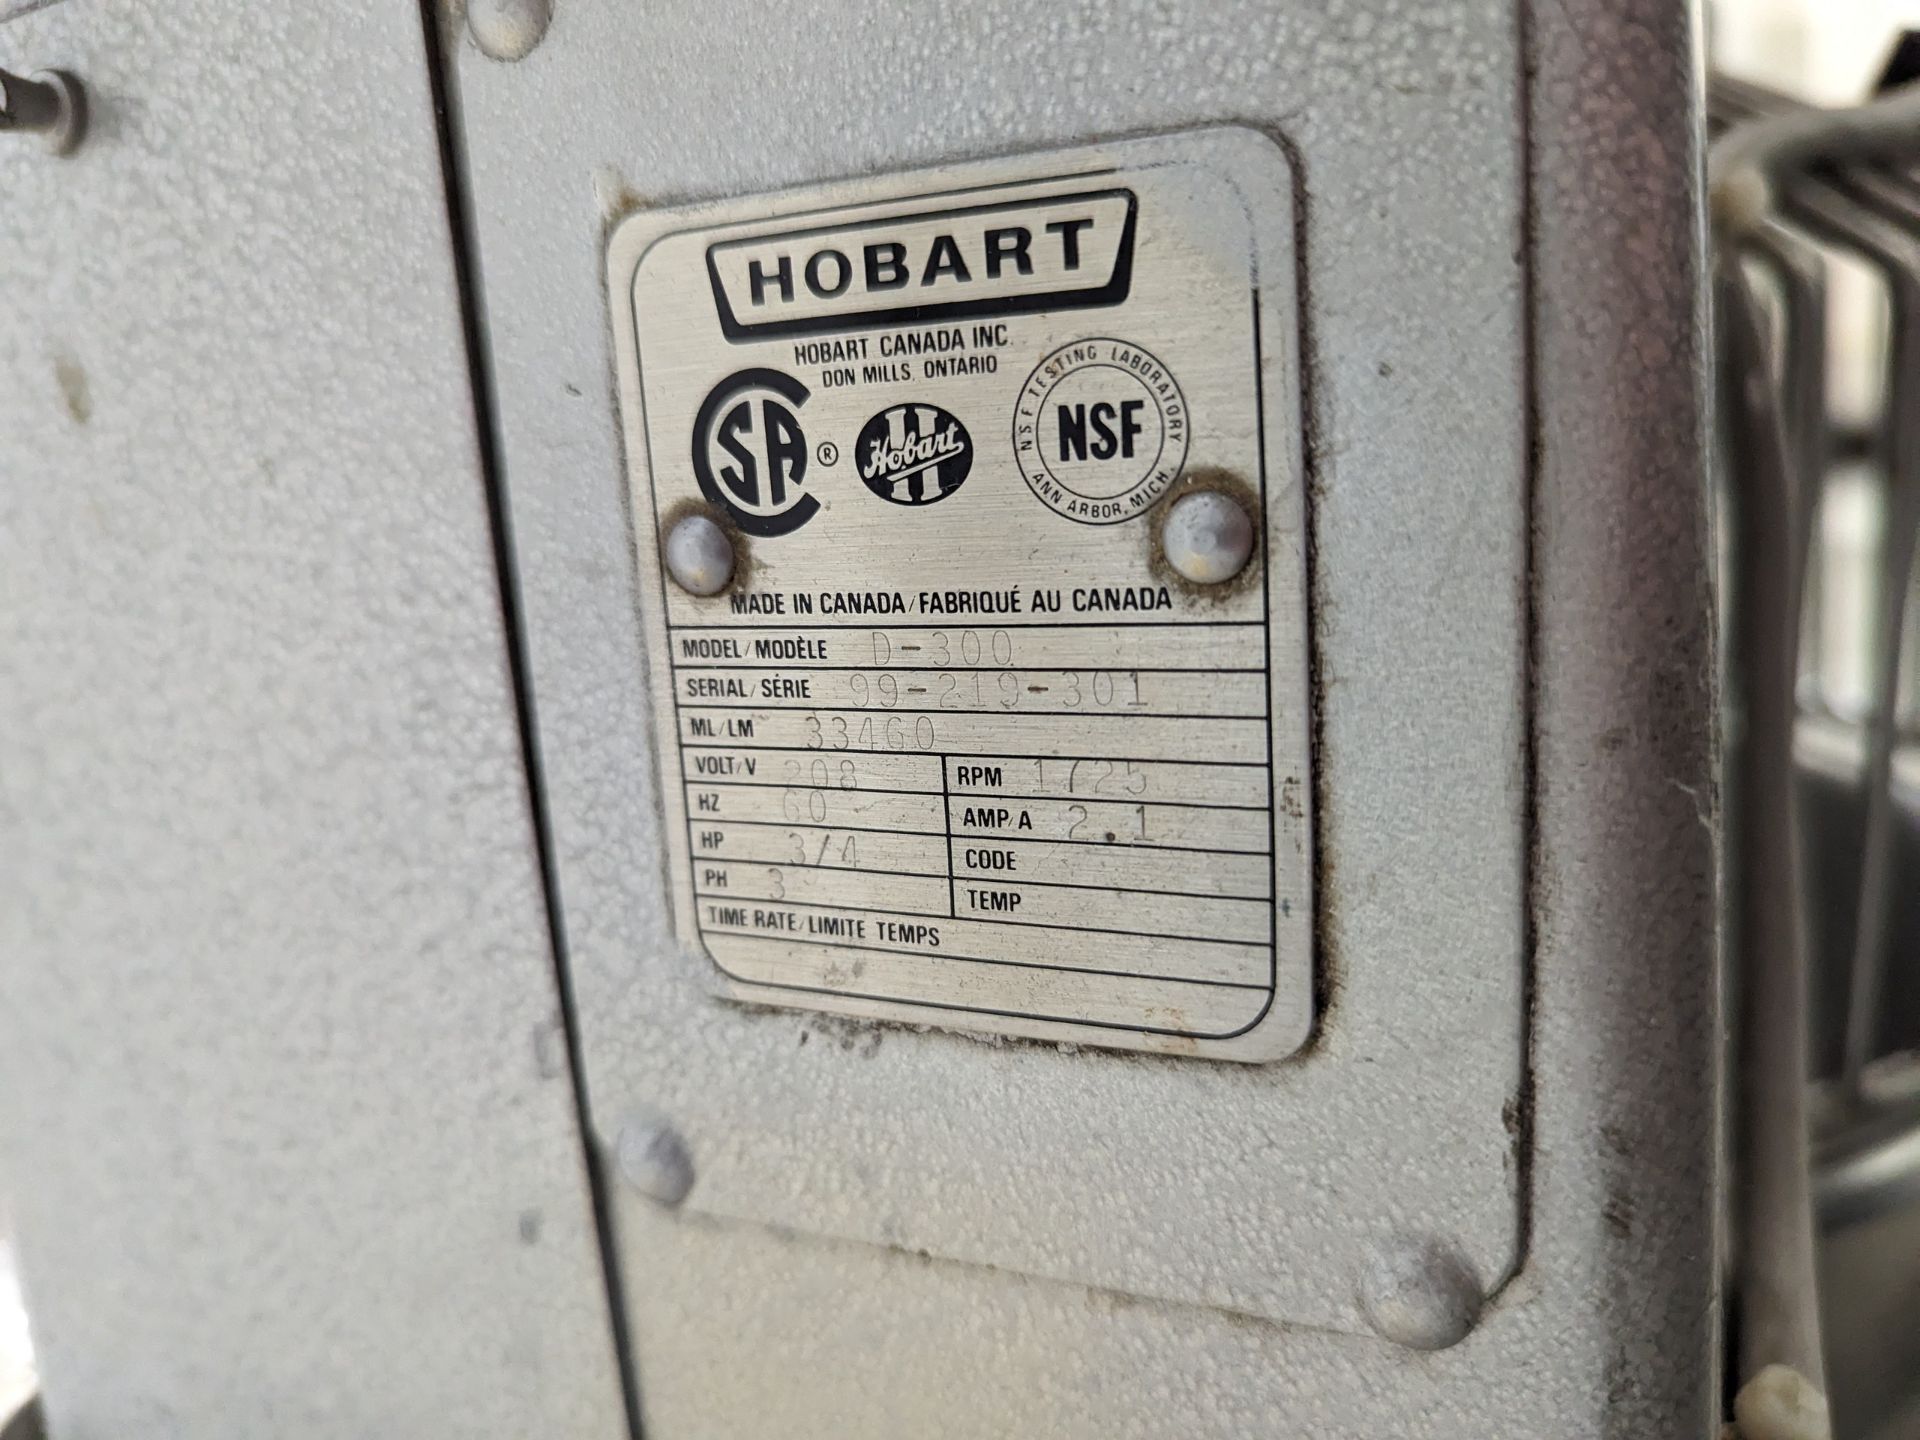 Hobart D300 Planetary Mixer, Dimensions LxWxH: 21x21x46 - Image 5 of 5